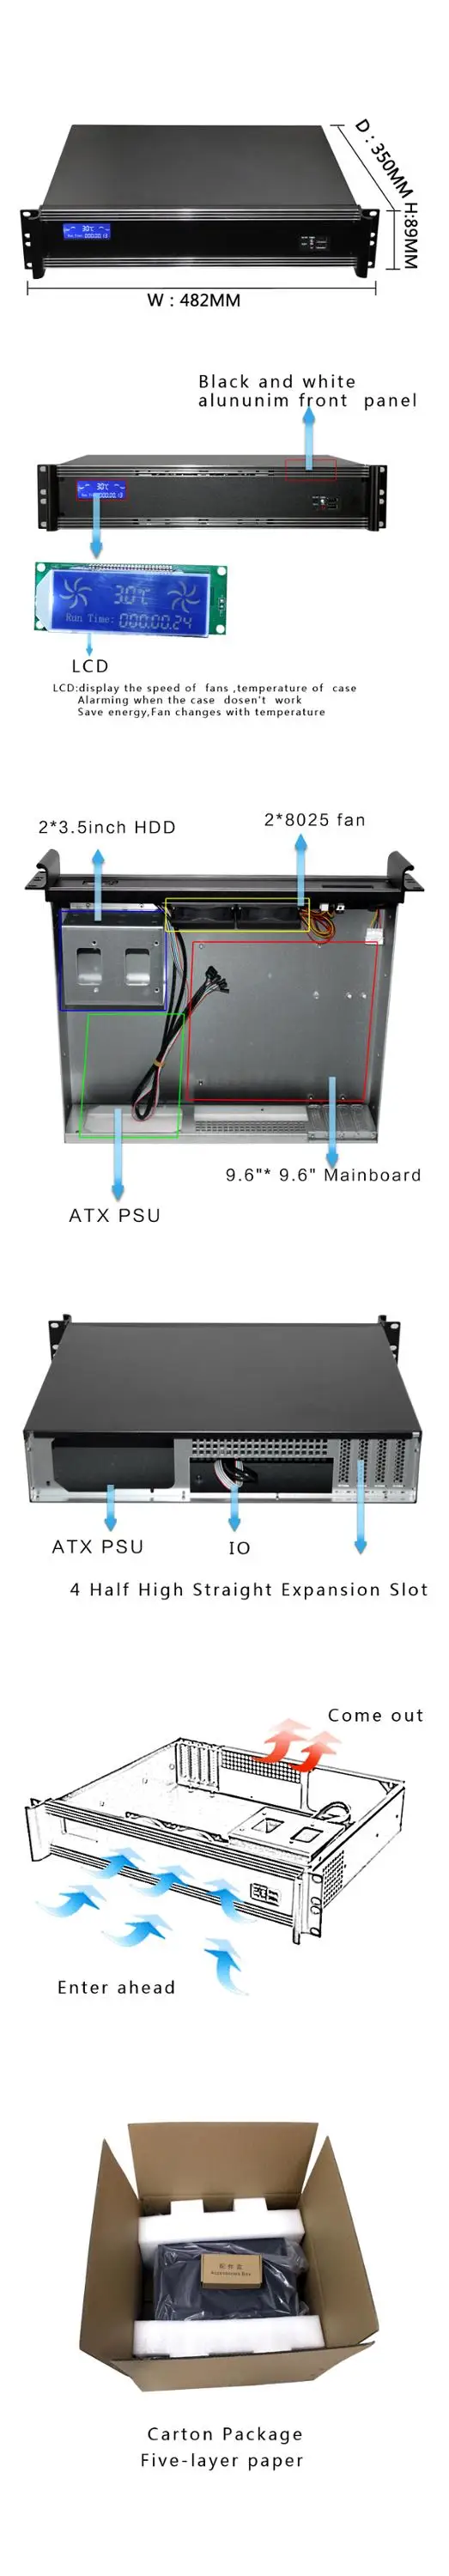 2019 Aluminum new products 2U 350mm deep rackmount chassis for 9.6*9.6 MB and 3*3.5" HDD